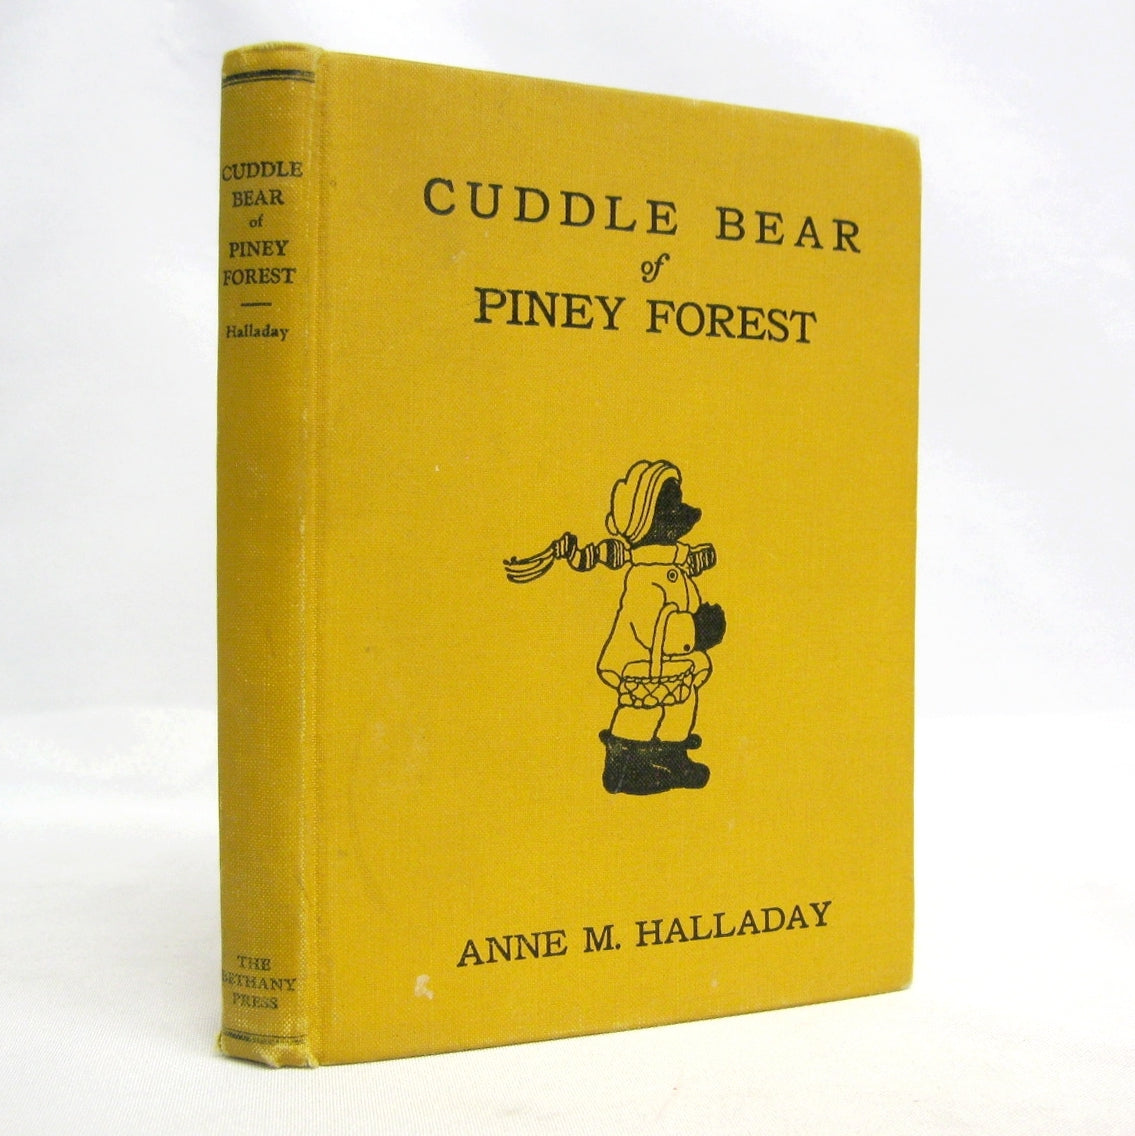 Cuddle Bear of Piney Forest by Anne M. Halladay